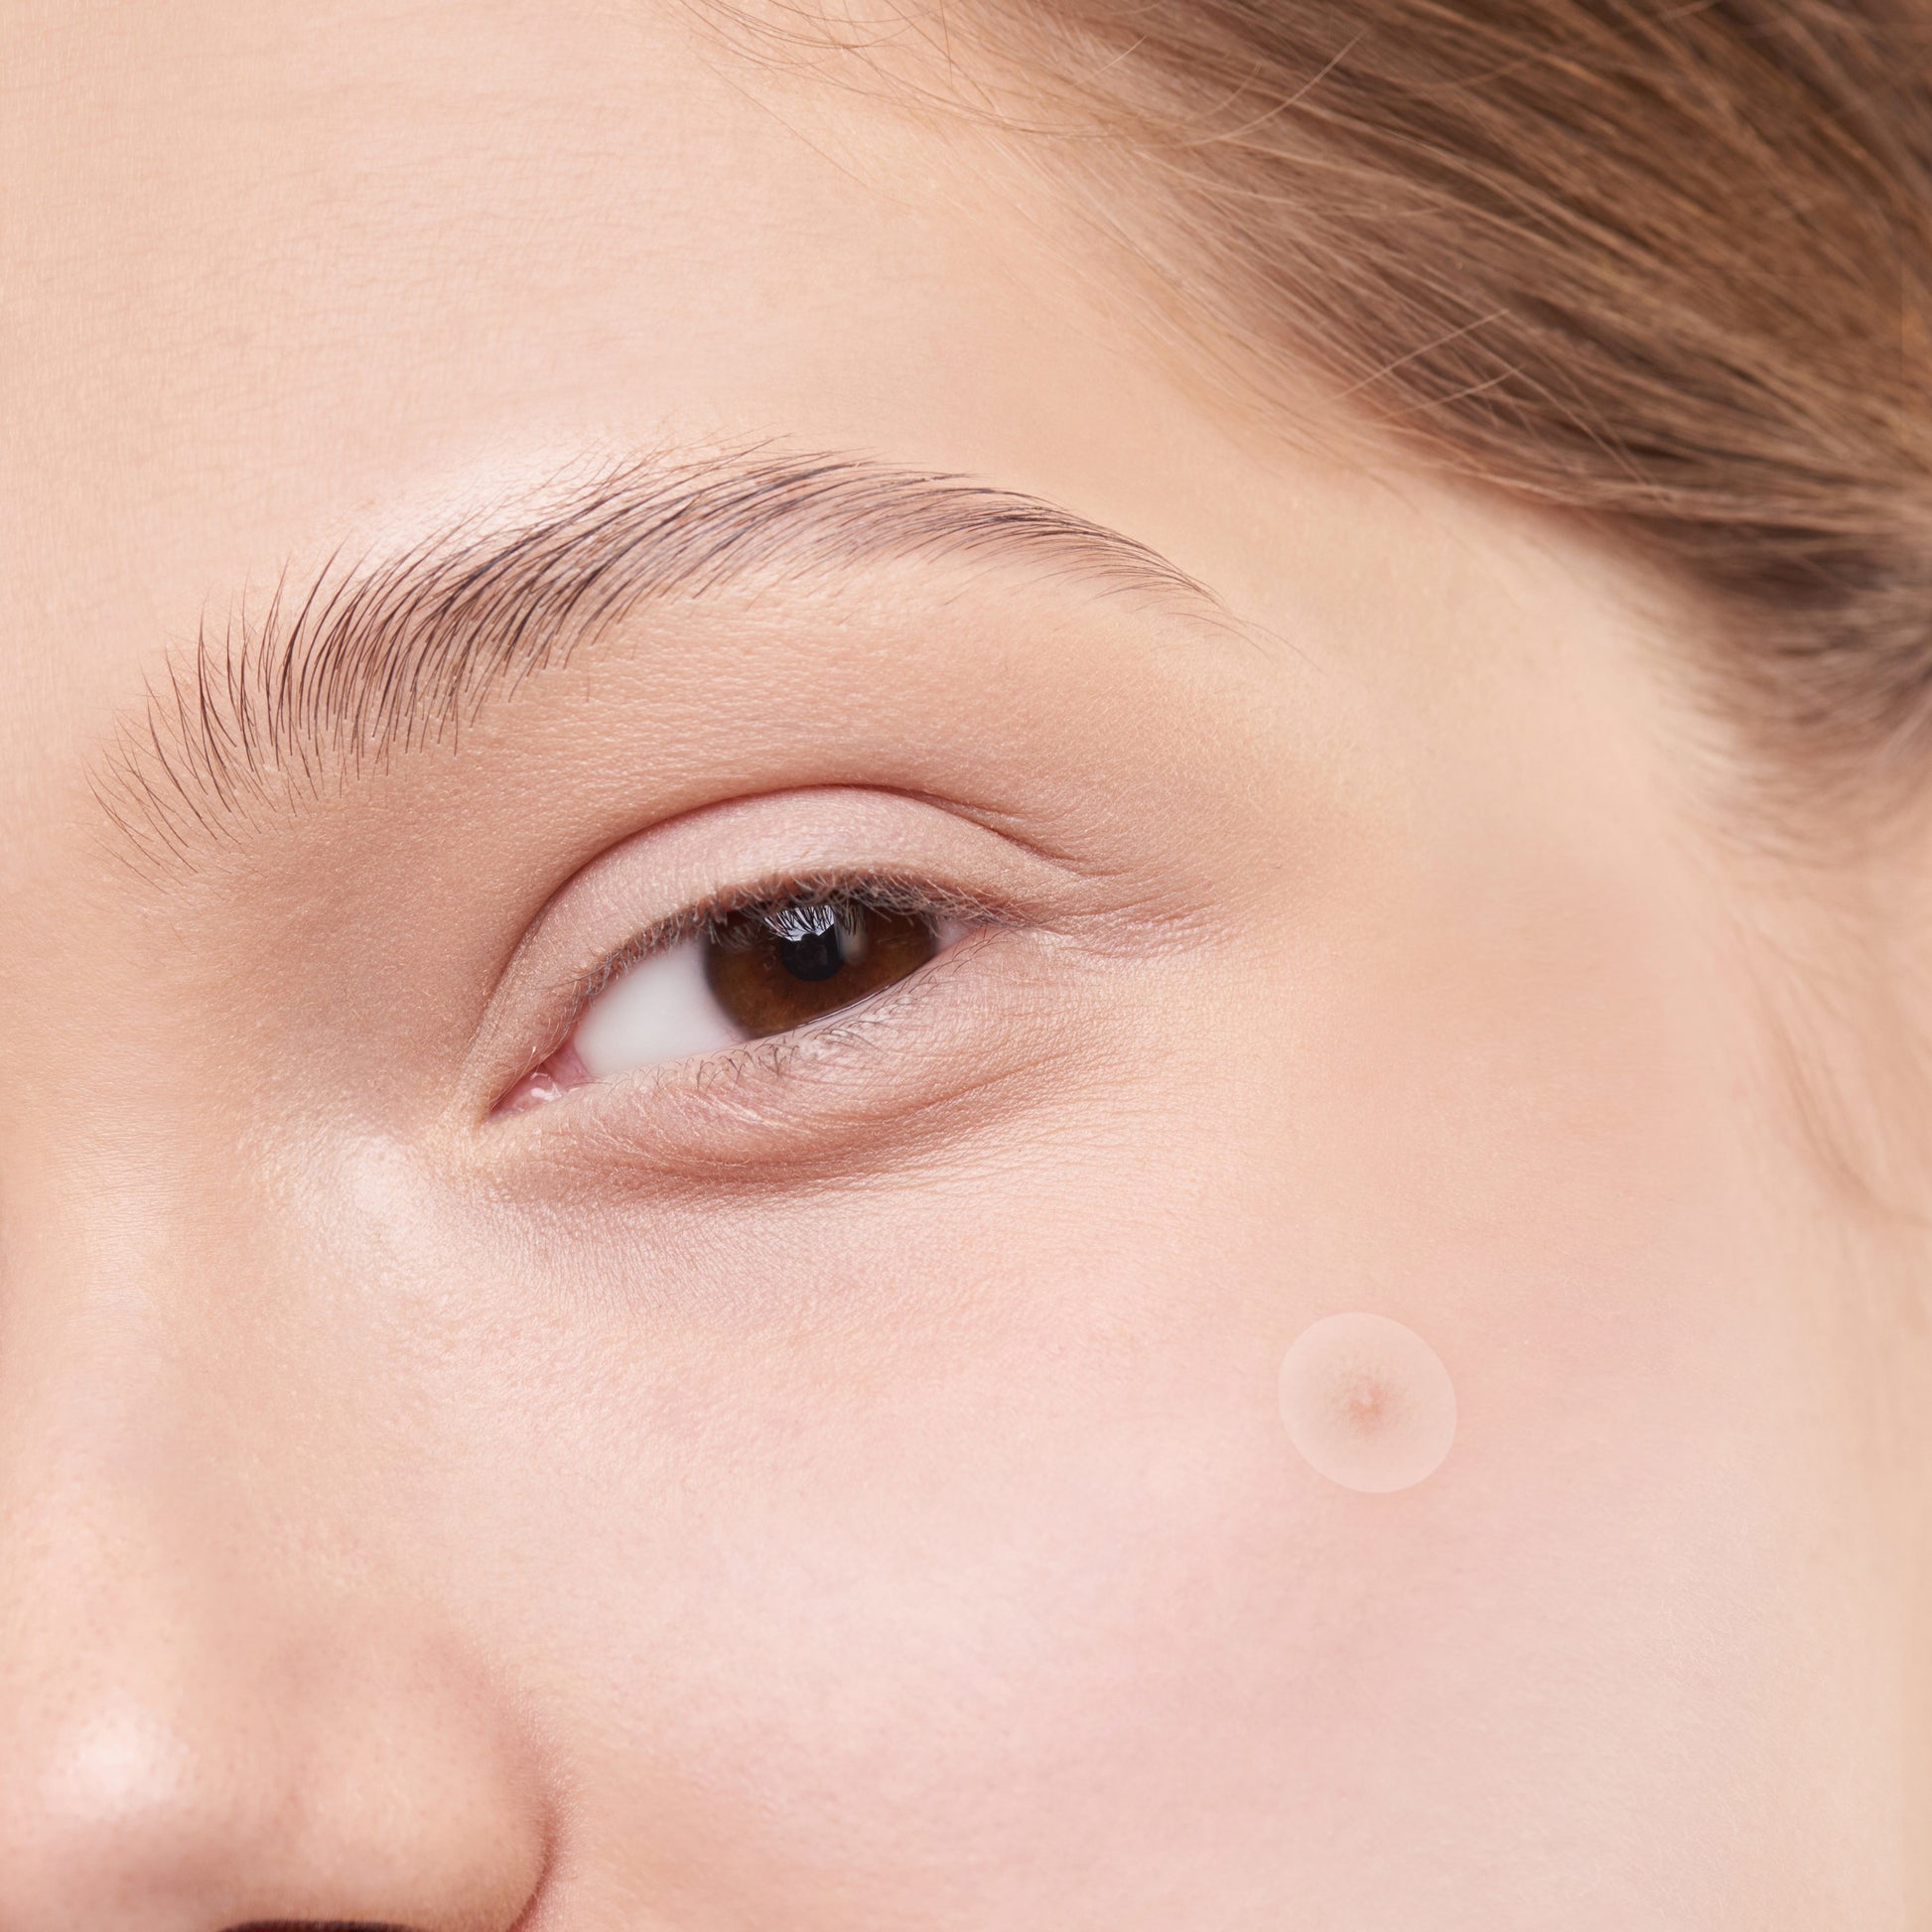 Pimple Patches that are difficult to see when on